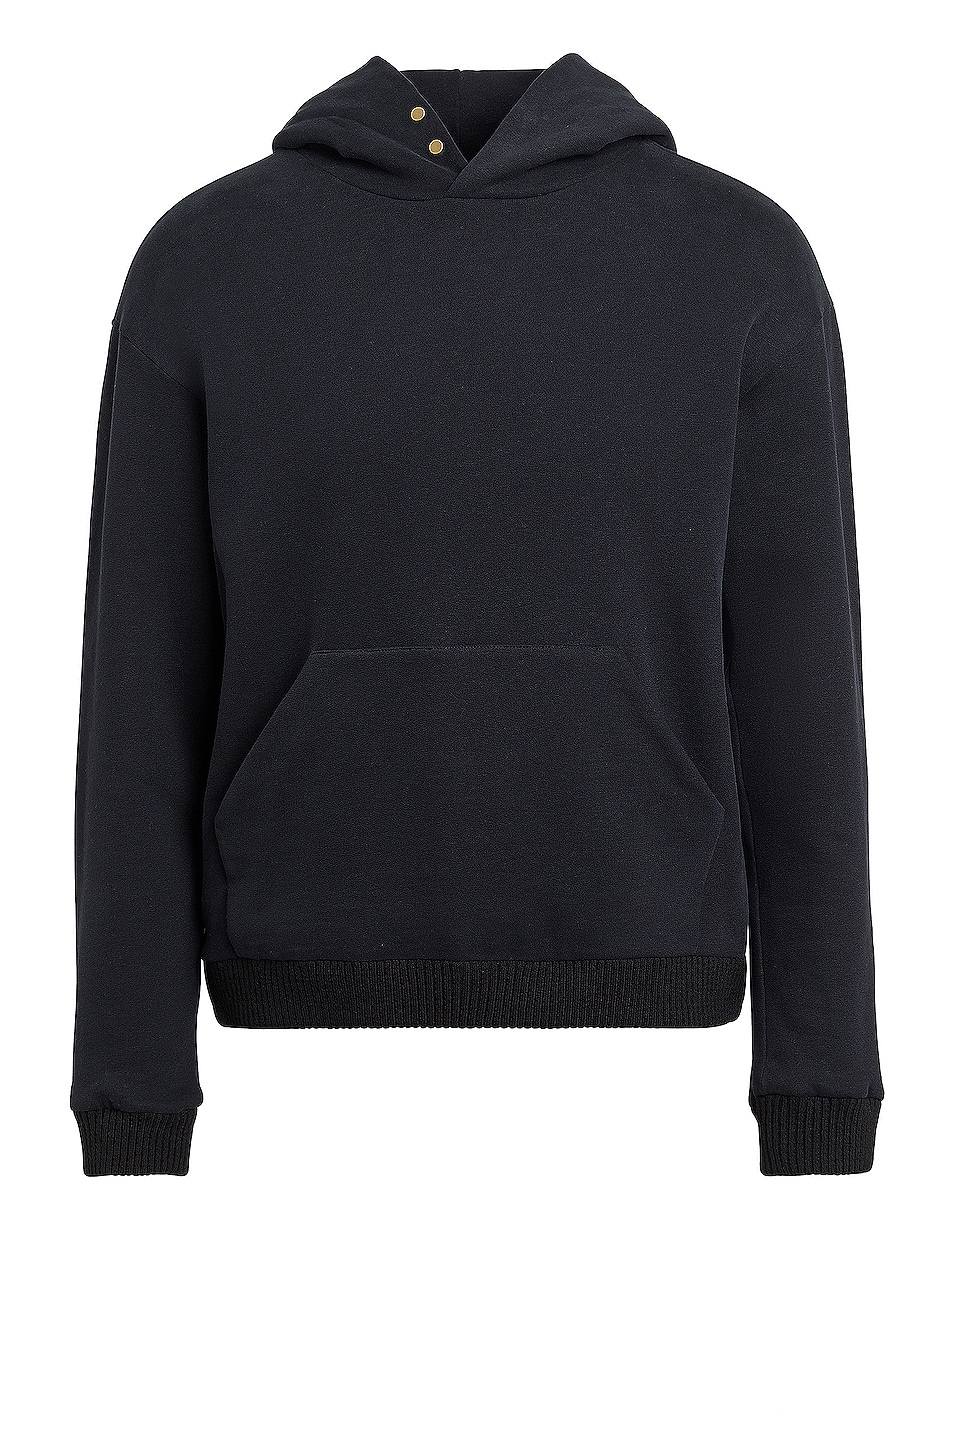 Fear of God Exclusively for Ermenegildo Zegna Slim Fit Hoodie in Black ...